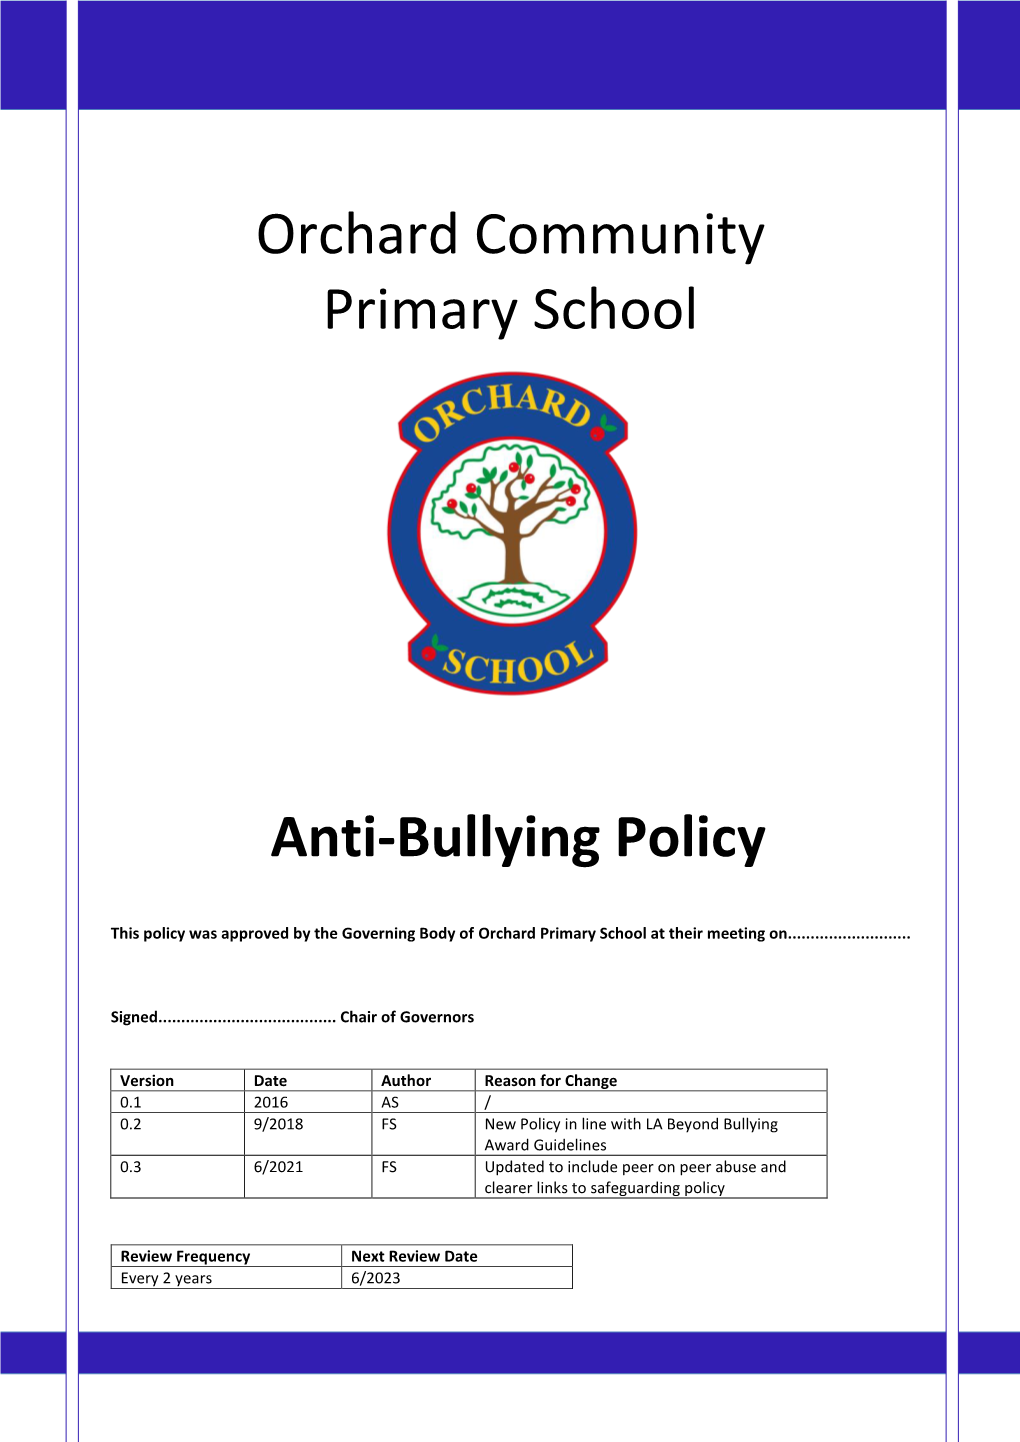 Orchard Community Primary School Anti-Bullying Policy